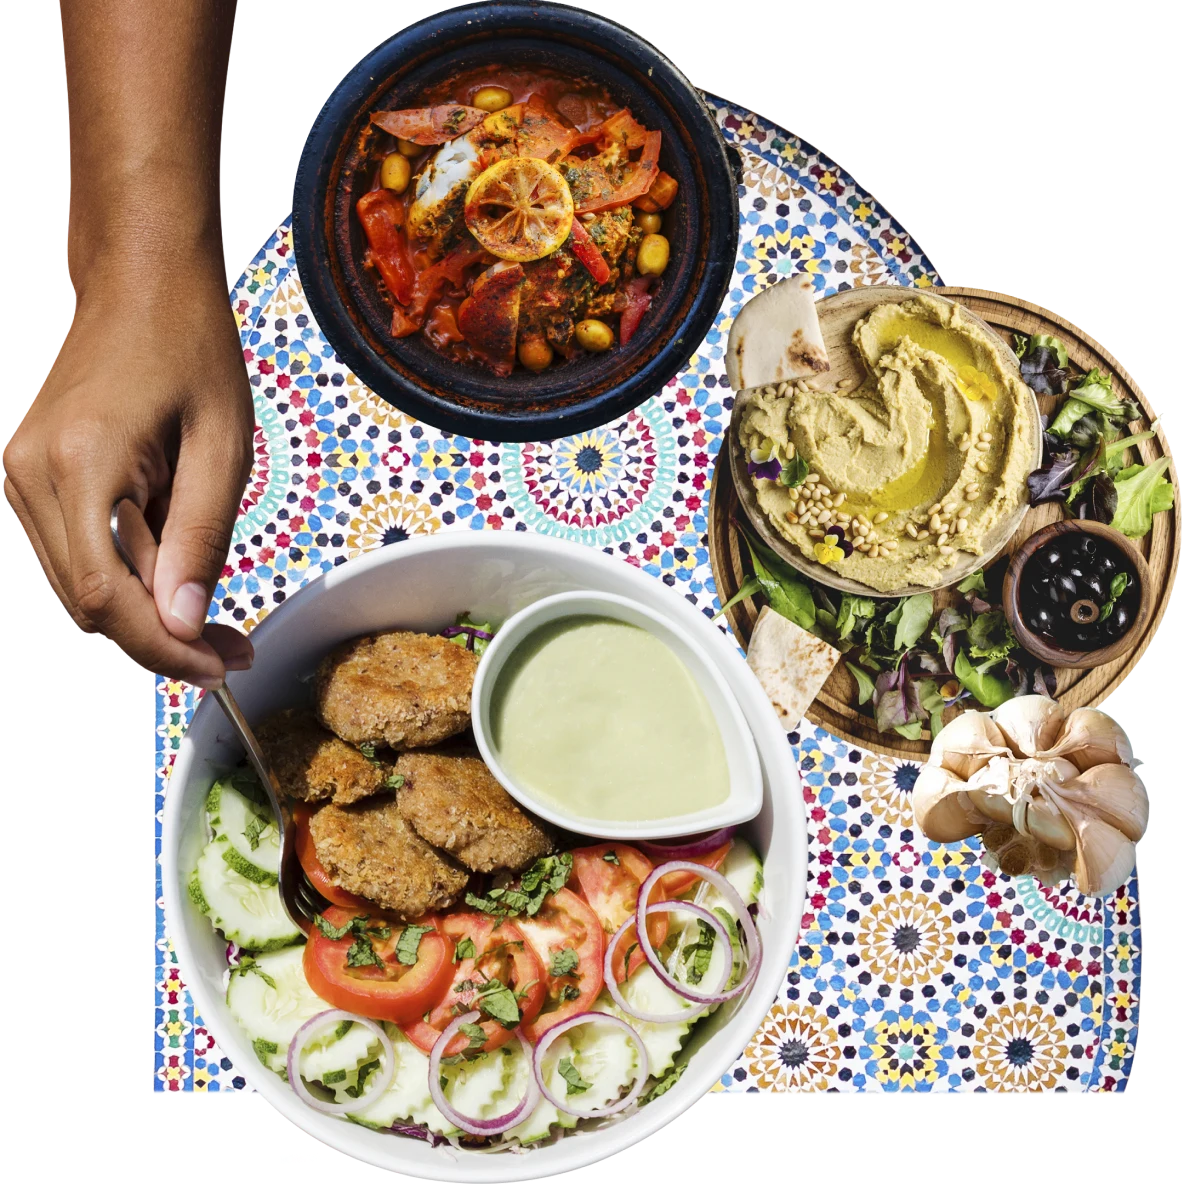 Collage of aerial views of Middle Eastern food. A bowl with falafel burgers, cucumber and tomato slices, onions and basil with a smaller bowl of sauce on the left. A bowl on the right with pita bread, salad and houmous. A bowl at the top with a tomato and corn stew.